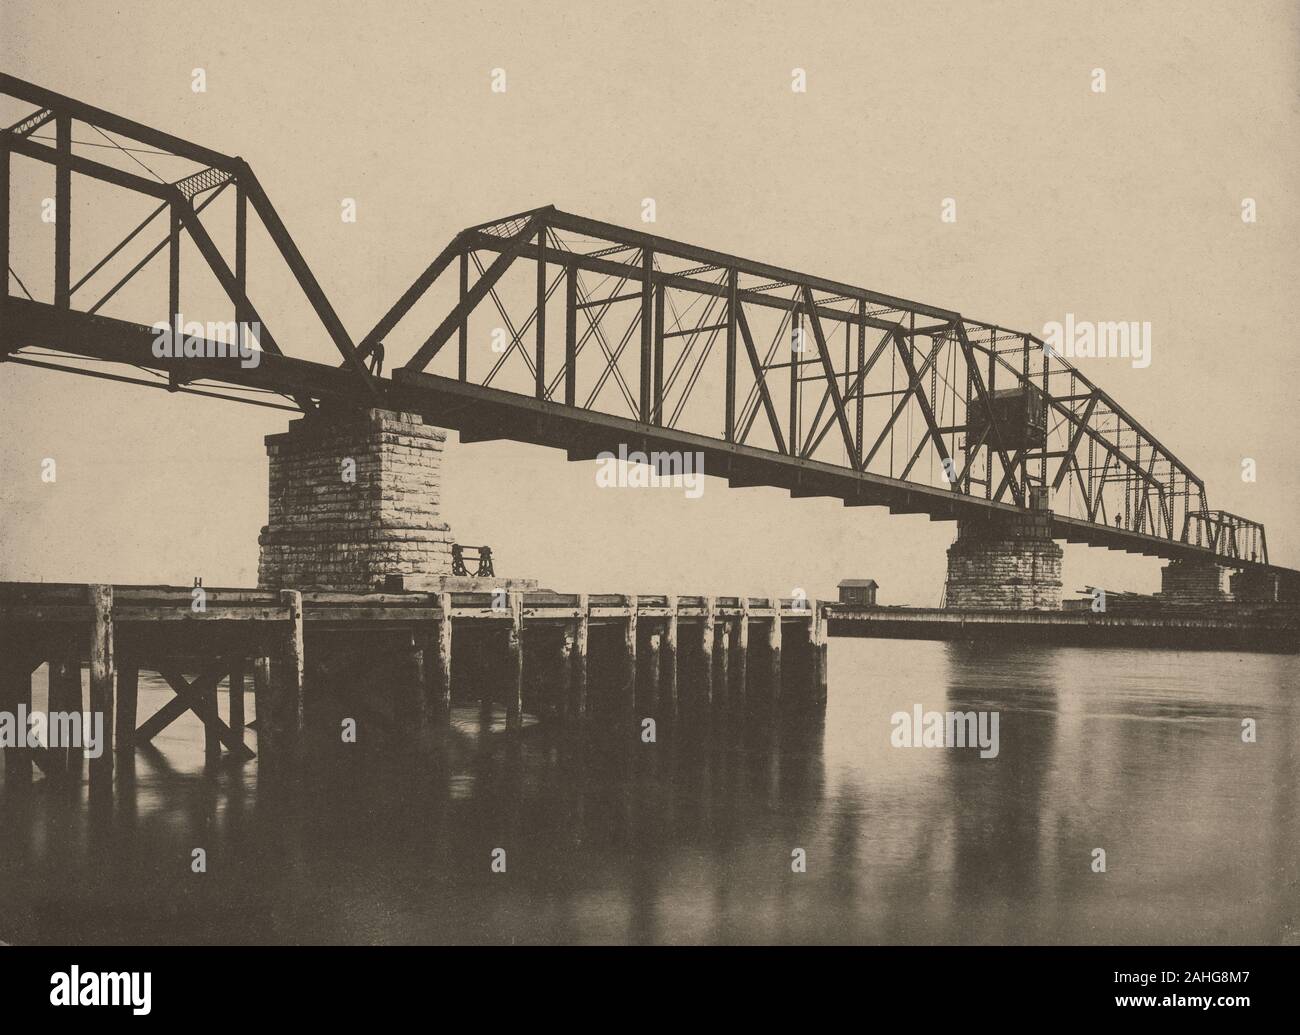 Antique c1890 photograph, “longest drawbridge in the world, B&O railroad over Arthur Kill between Elizabethport, NJ and Staten Island, NY.” The Arthur Kill Bridge was a railroad bridge connecting Staten Island to New Jersey's Chemical Coast, opening with ceremony on January 1, 1890. SOURCE: ORIGINAL CYANOTYPE PHOTOGRAPH Stock Photo